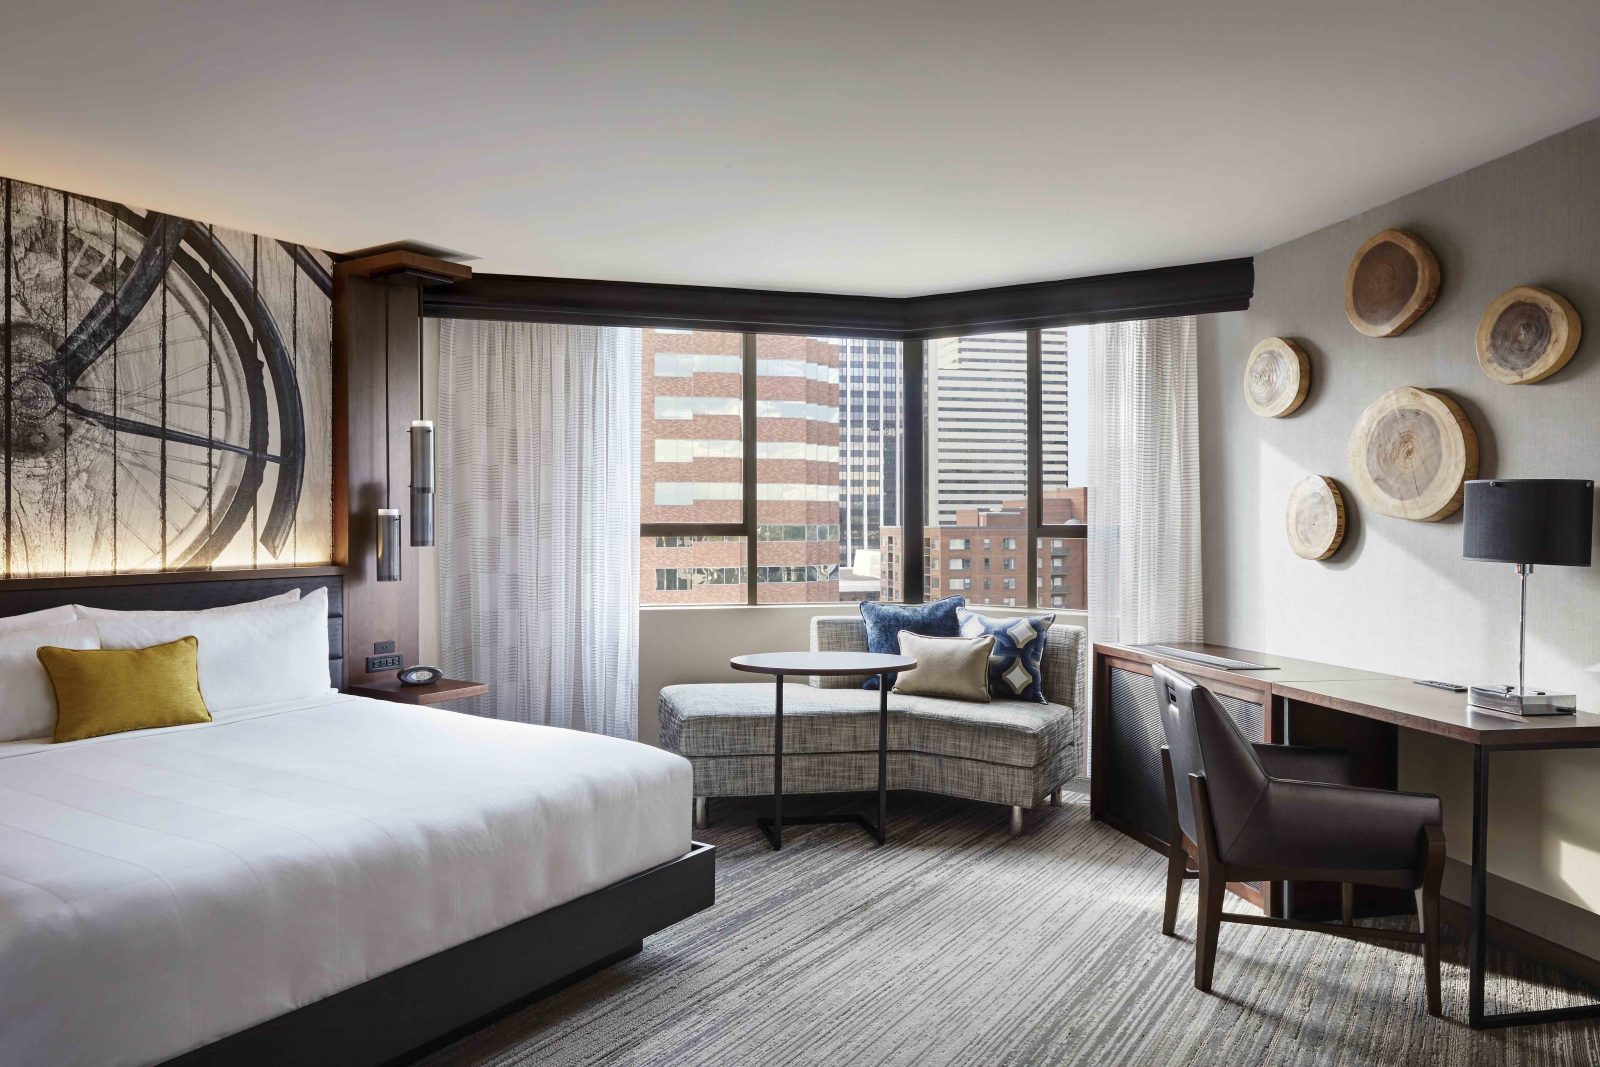 Learn From the Pro's: Here's How American Airlines Chooses the Perfect Hotel Rooms for its Flight Attendants